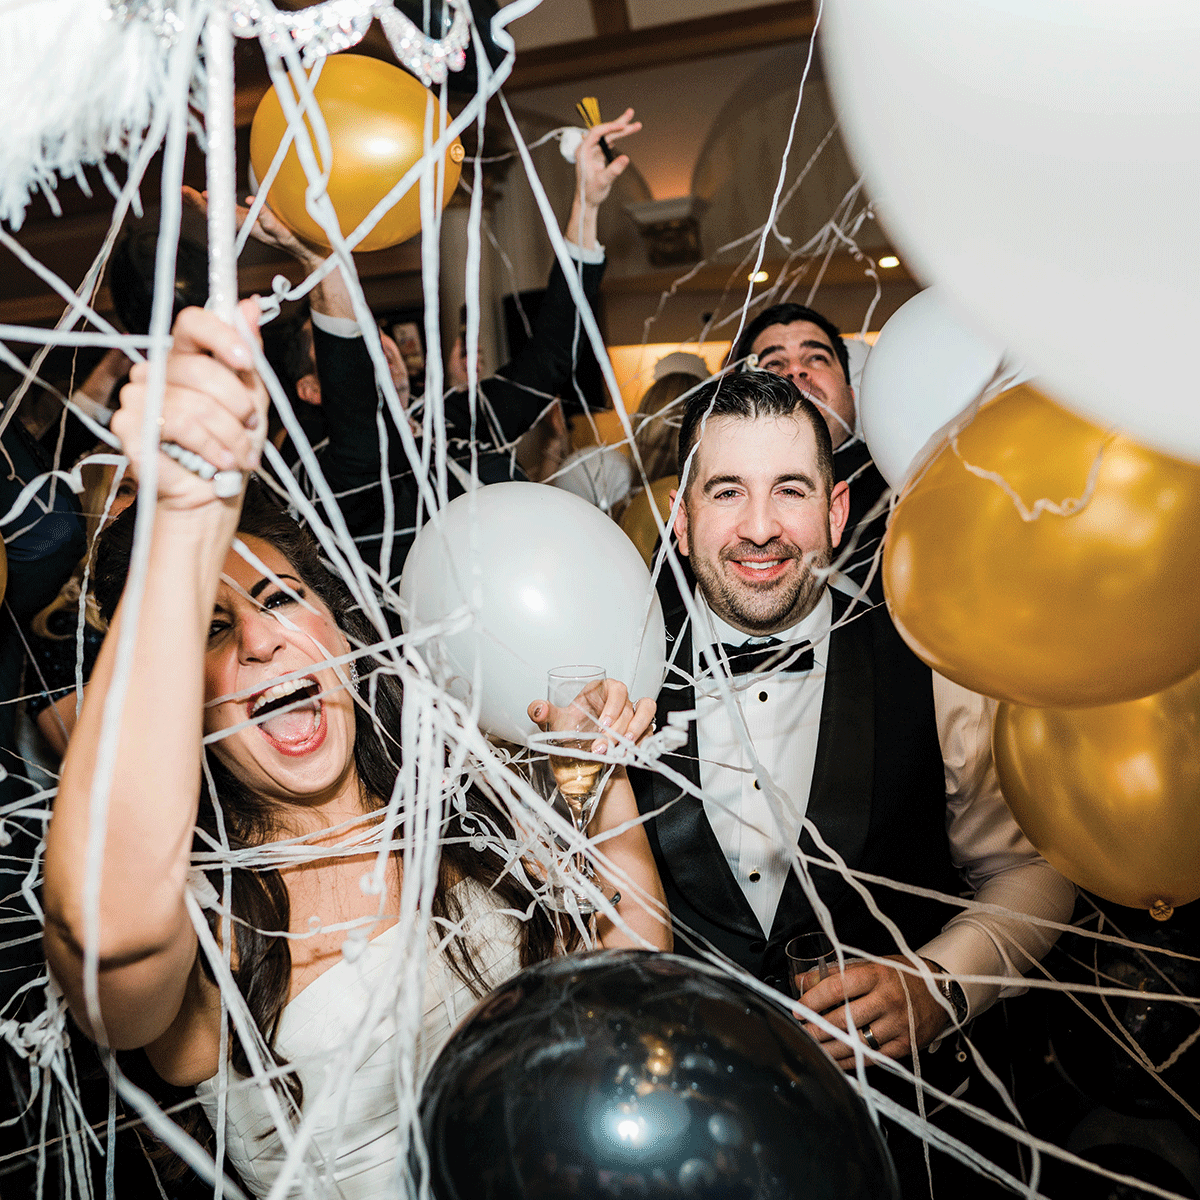 It’s never too early or late to save the date you want to be married on.
Photo by:Photos: Jessra Photography

#engaged2023 #wedding2024 #yourweddingyourway #ctwedding #ctweddingvenue #weddingtrends2024 #ctpartyvenue #partyplanning